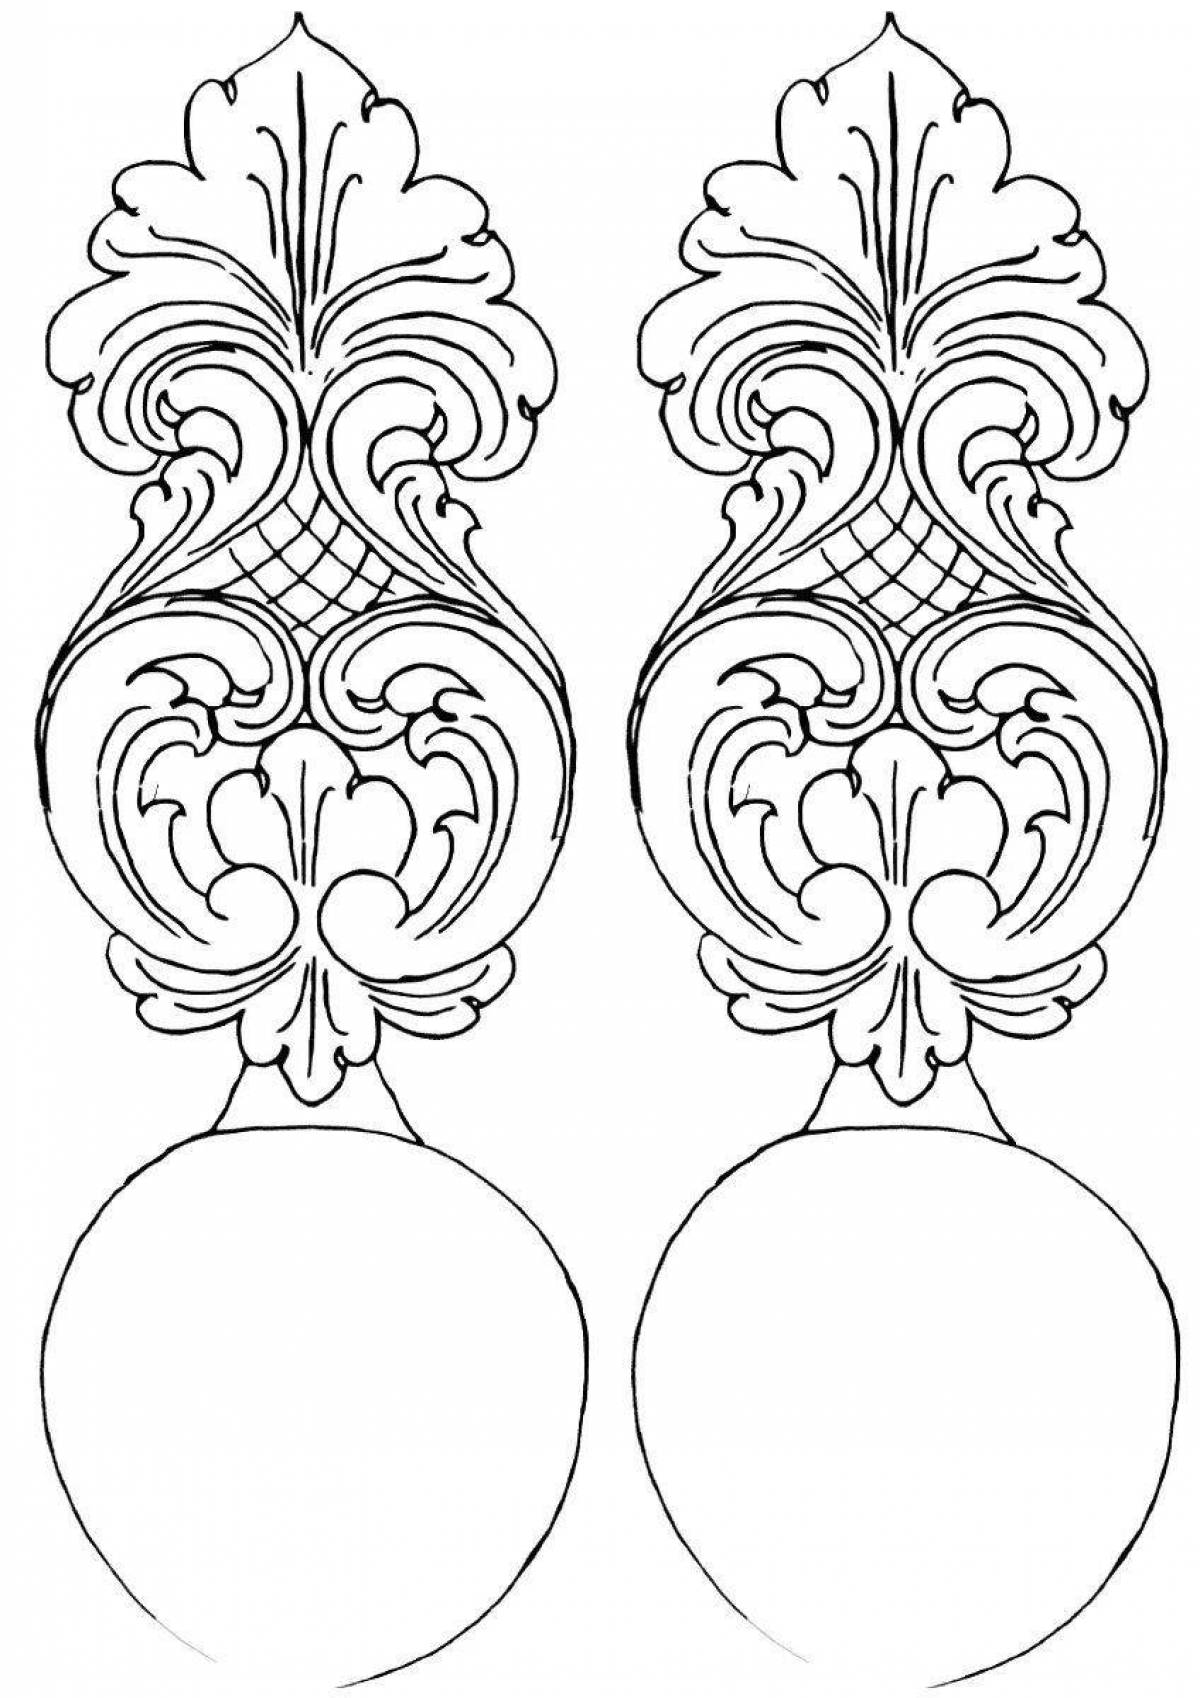 Dazzlingly painted wooden spoon coloring page